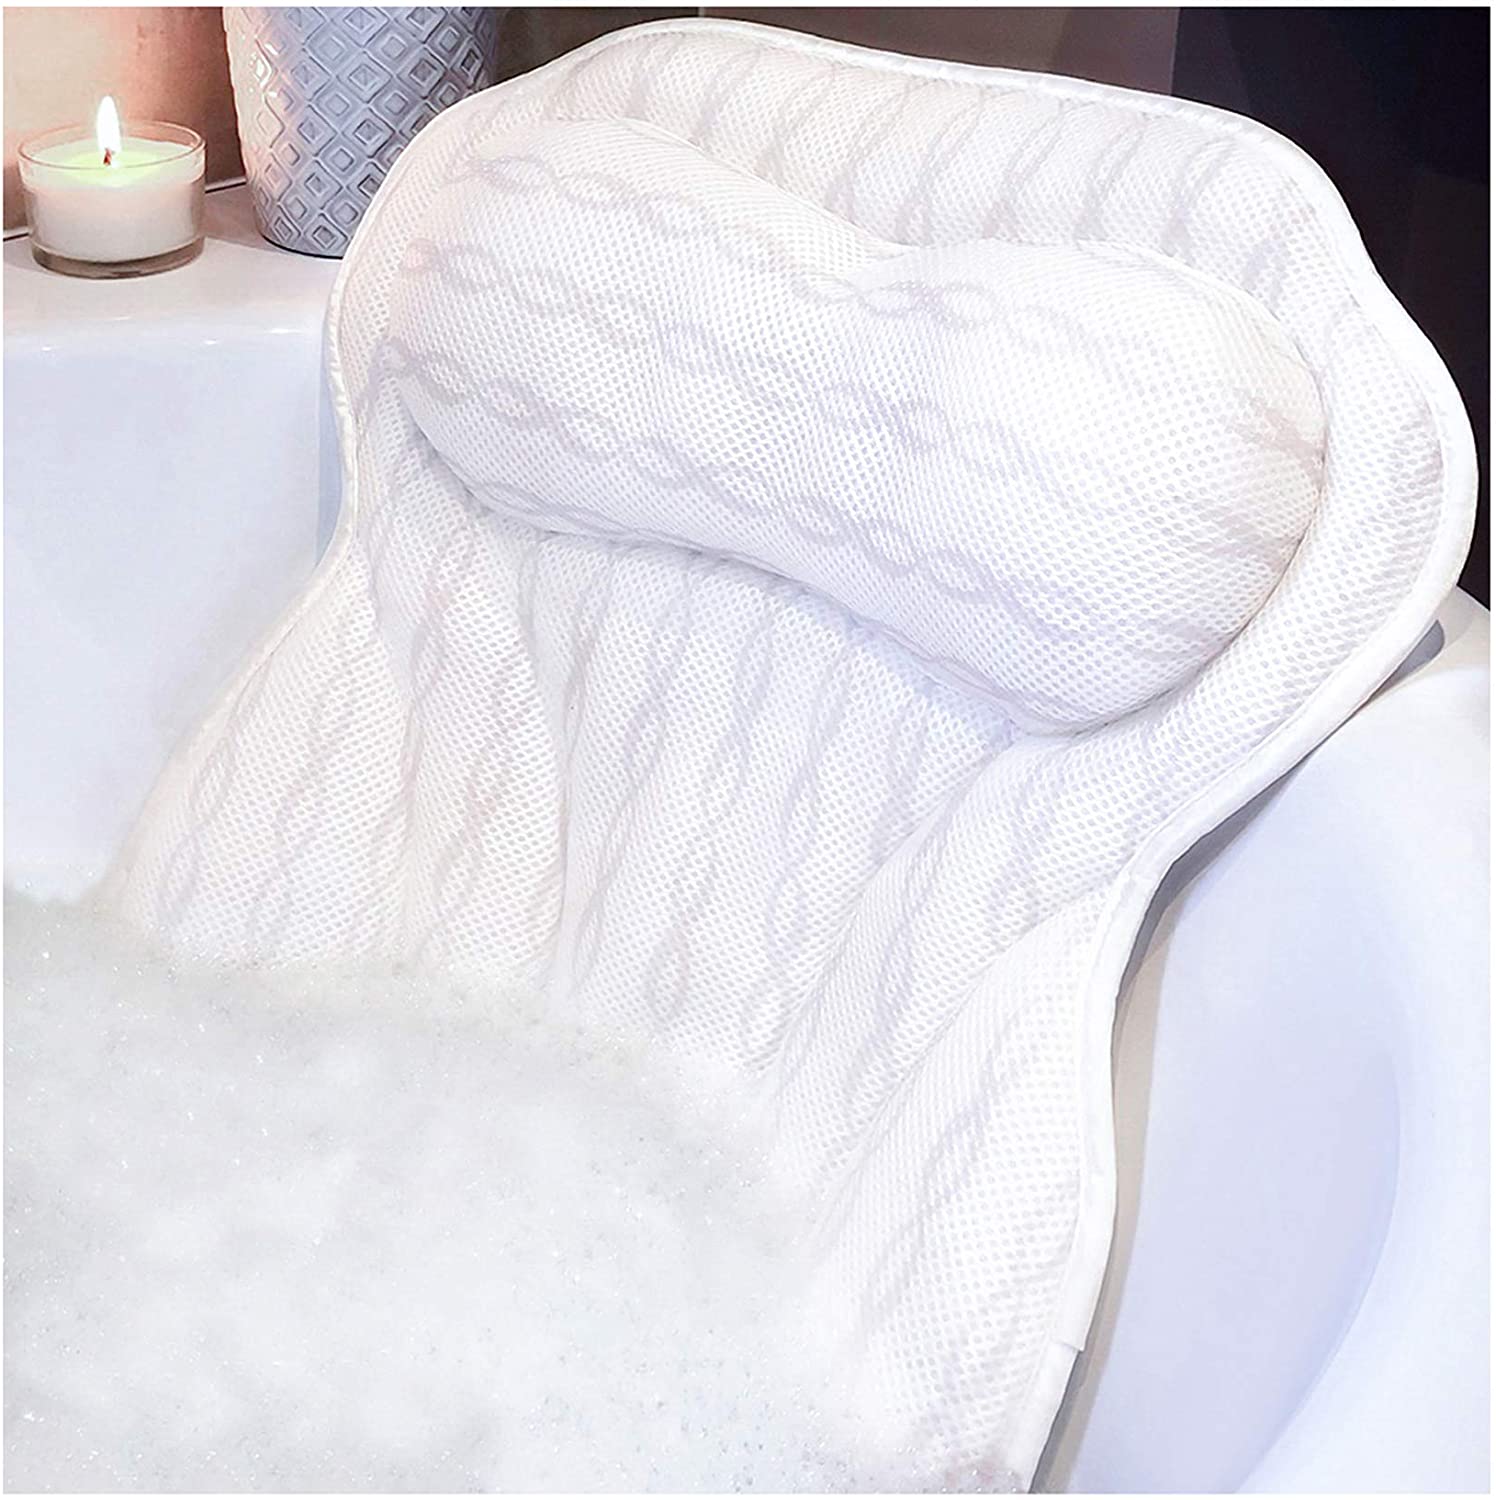 Full Body Bathtub Cushion Comfortable Relaxing Spa Mat with Adjustable Pillow 